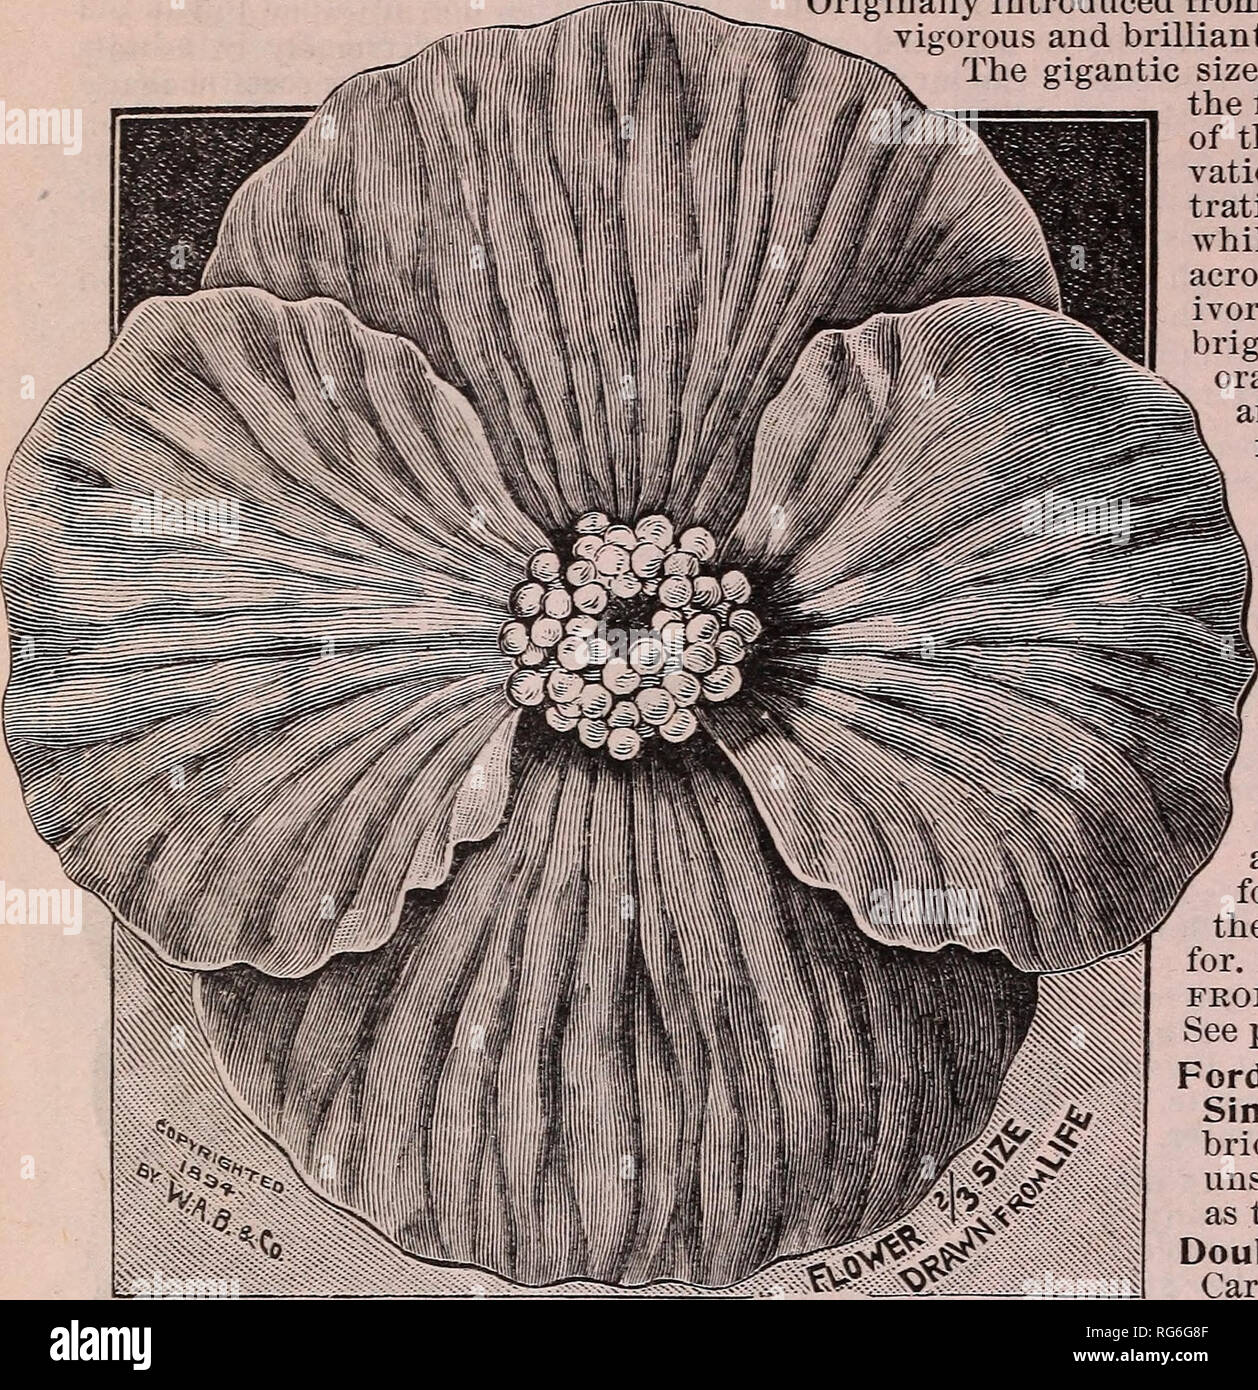 . Burpee's farm annual : the best seeds that grow including rare novelties. Nurseries (Horticulture) Pennsylvania Philadelphia Catalogs; Vegetables Seeds Catalogs; Fruit Catalogs; Plants, Ornamental Catalogs; Flowers Seeds Catalogs. W. ATLEE BURPEE &amp; CO., PHILADELPHIA. F0RDH00K GIGANTIC TUBEROUS-ROOTED BEGONIAS. Selected, Hybridized, and Grown at Fordhook Farm. Originally'introduced from the Andes Mountains of South America, these vigorous and brilliant tuberous-rooted plants are now first favorites. The gigantic size, lasting substance, and vividly rich colors of the flowers as grown at F Stock Photo